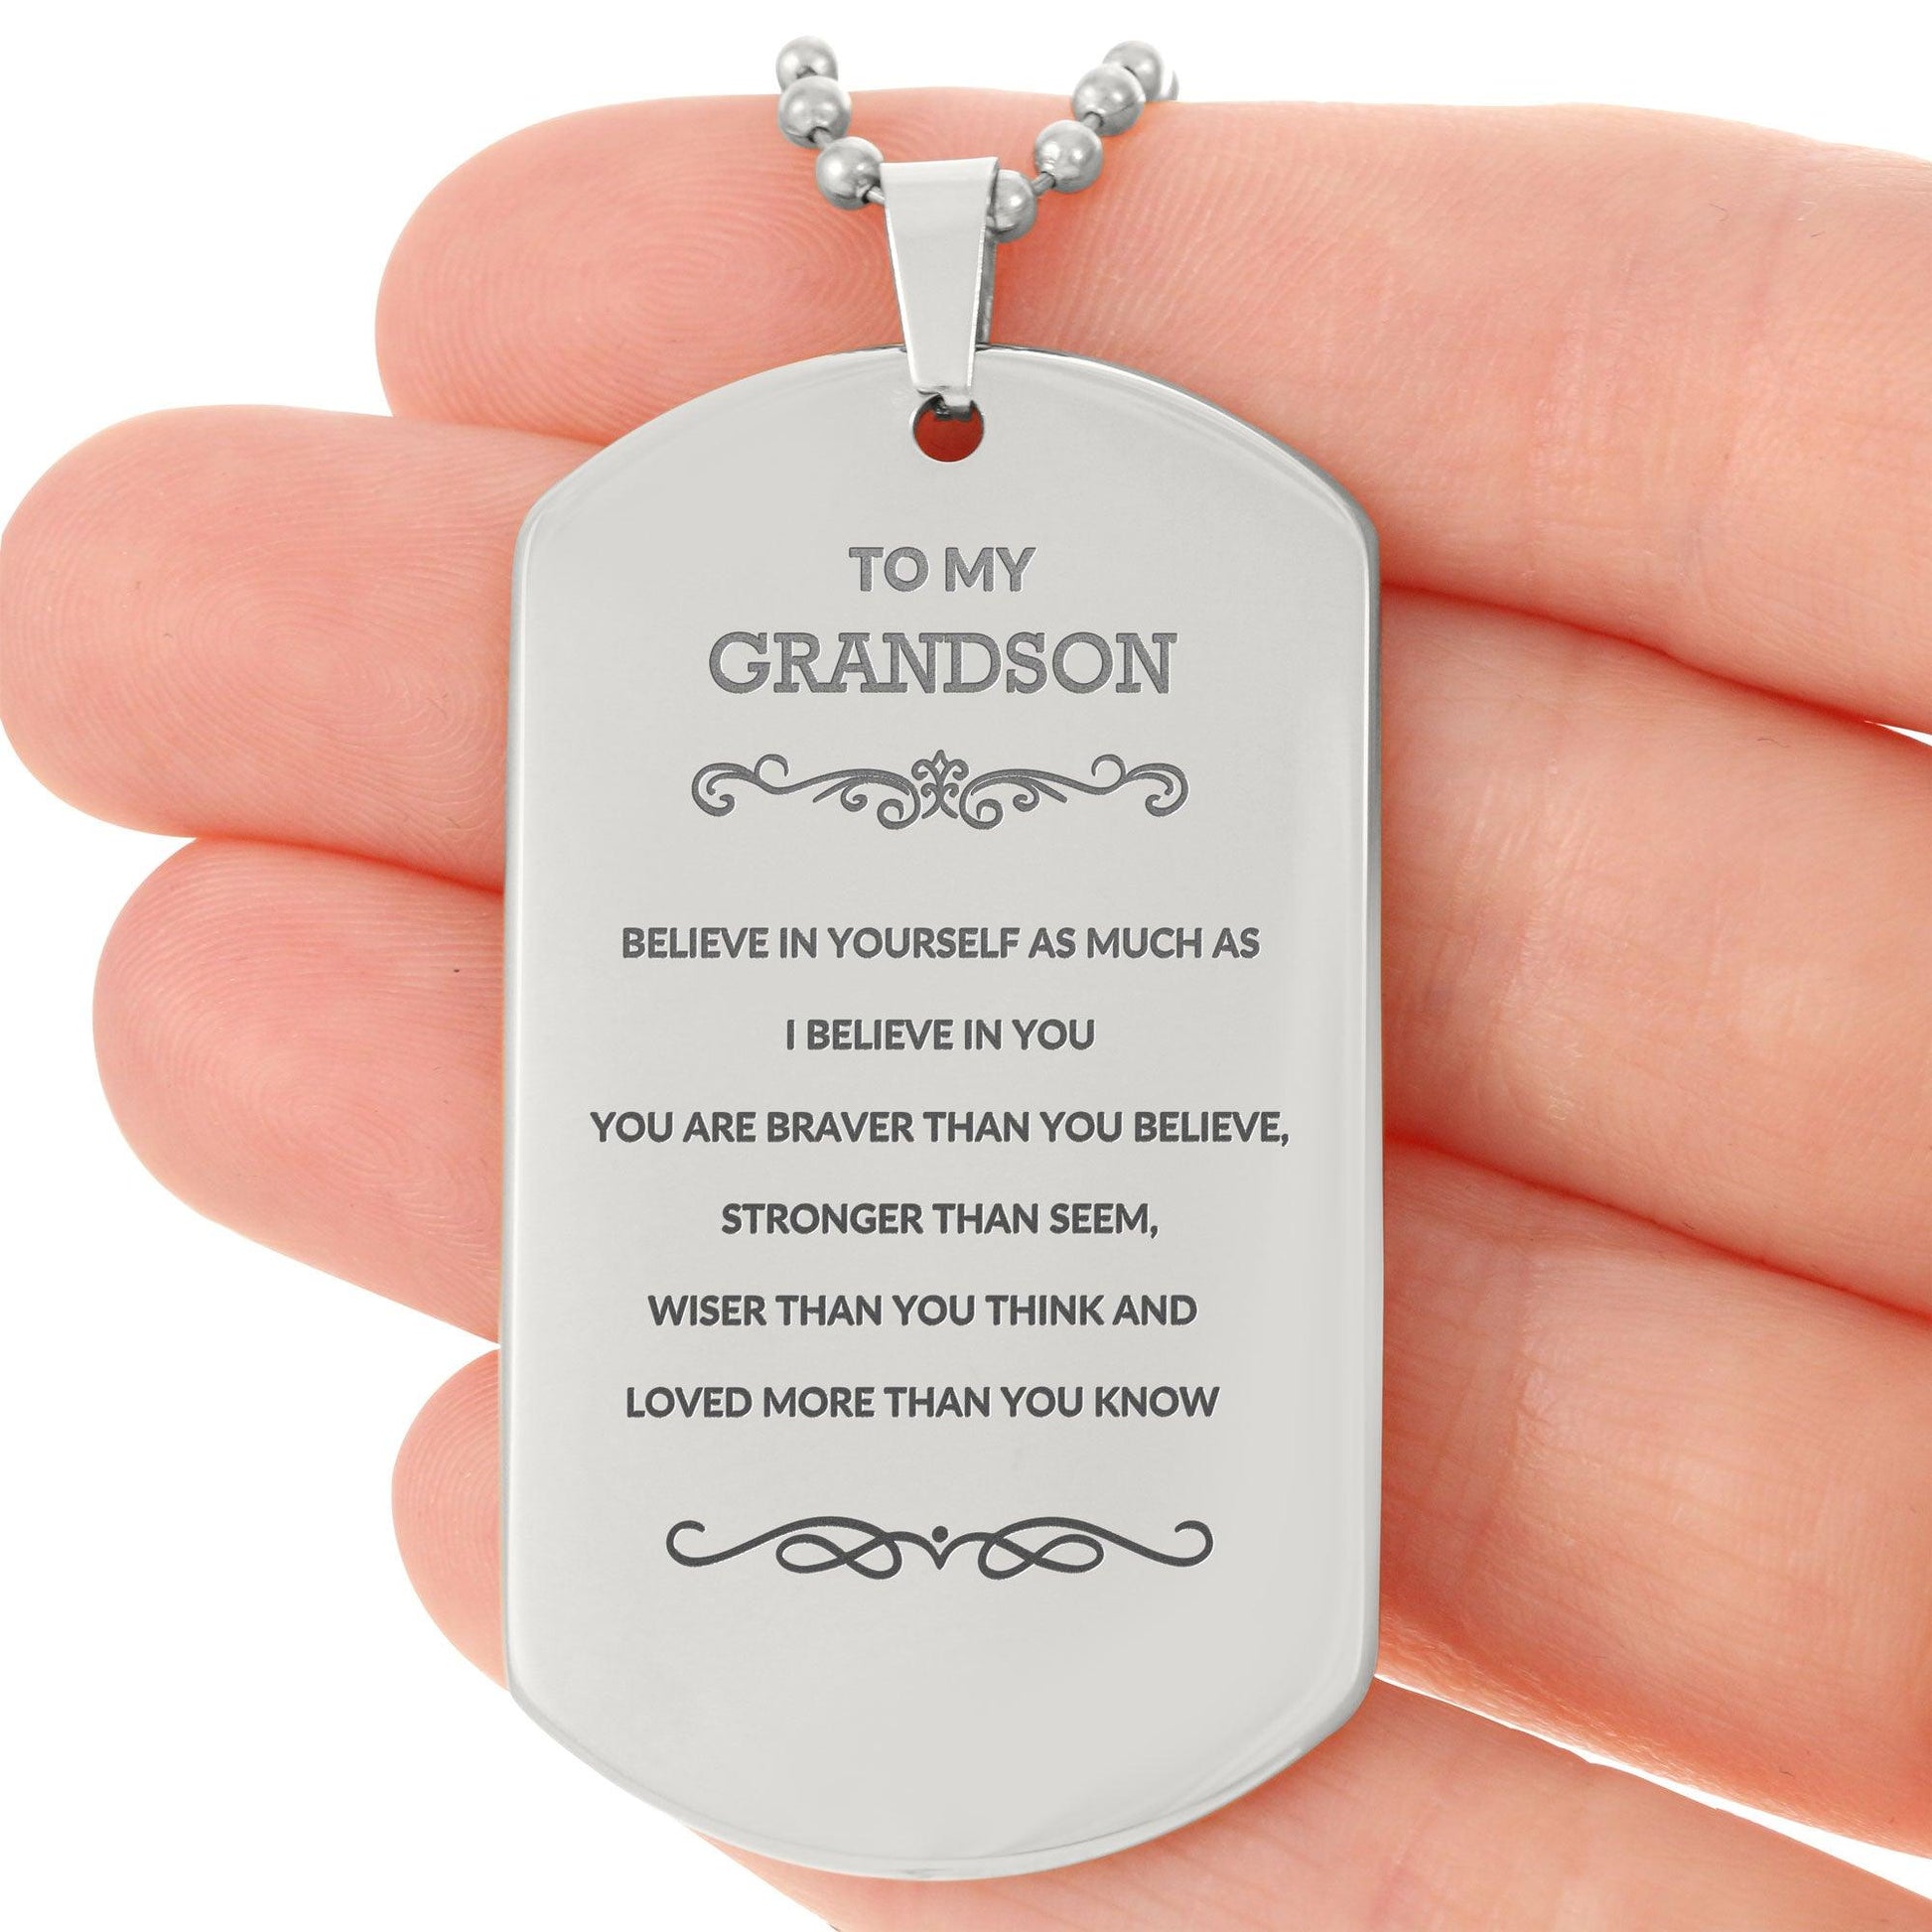 Grandson Engraved Silver Dog Tag Necklace, Motivational Heartfelt Birthday, Christmas Holiday Gifts For Grandson, You are Braver than you Believe, Loved More than you Know - Mallard Moon Gift Shop